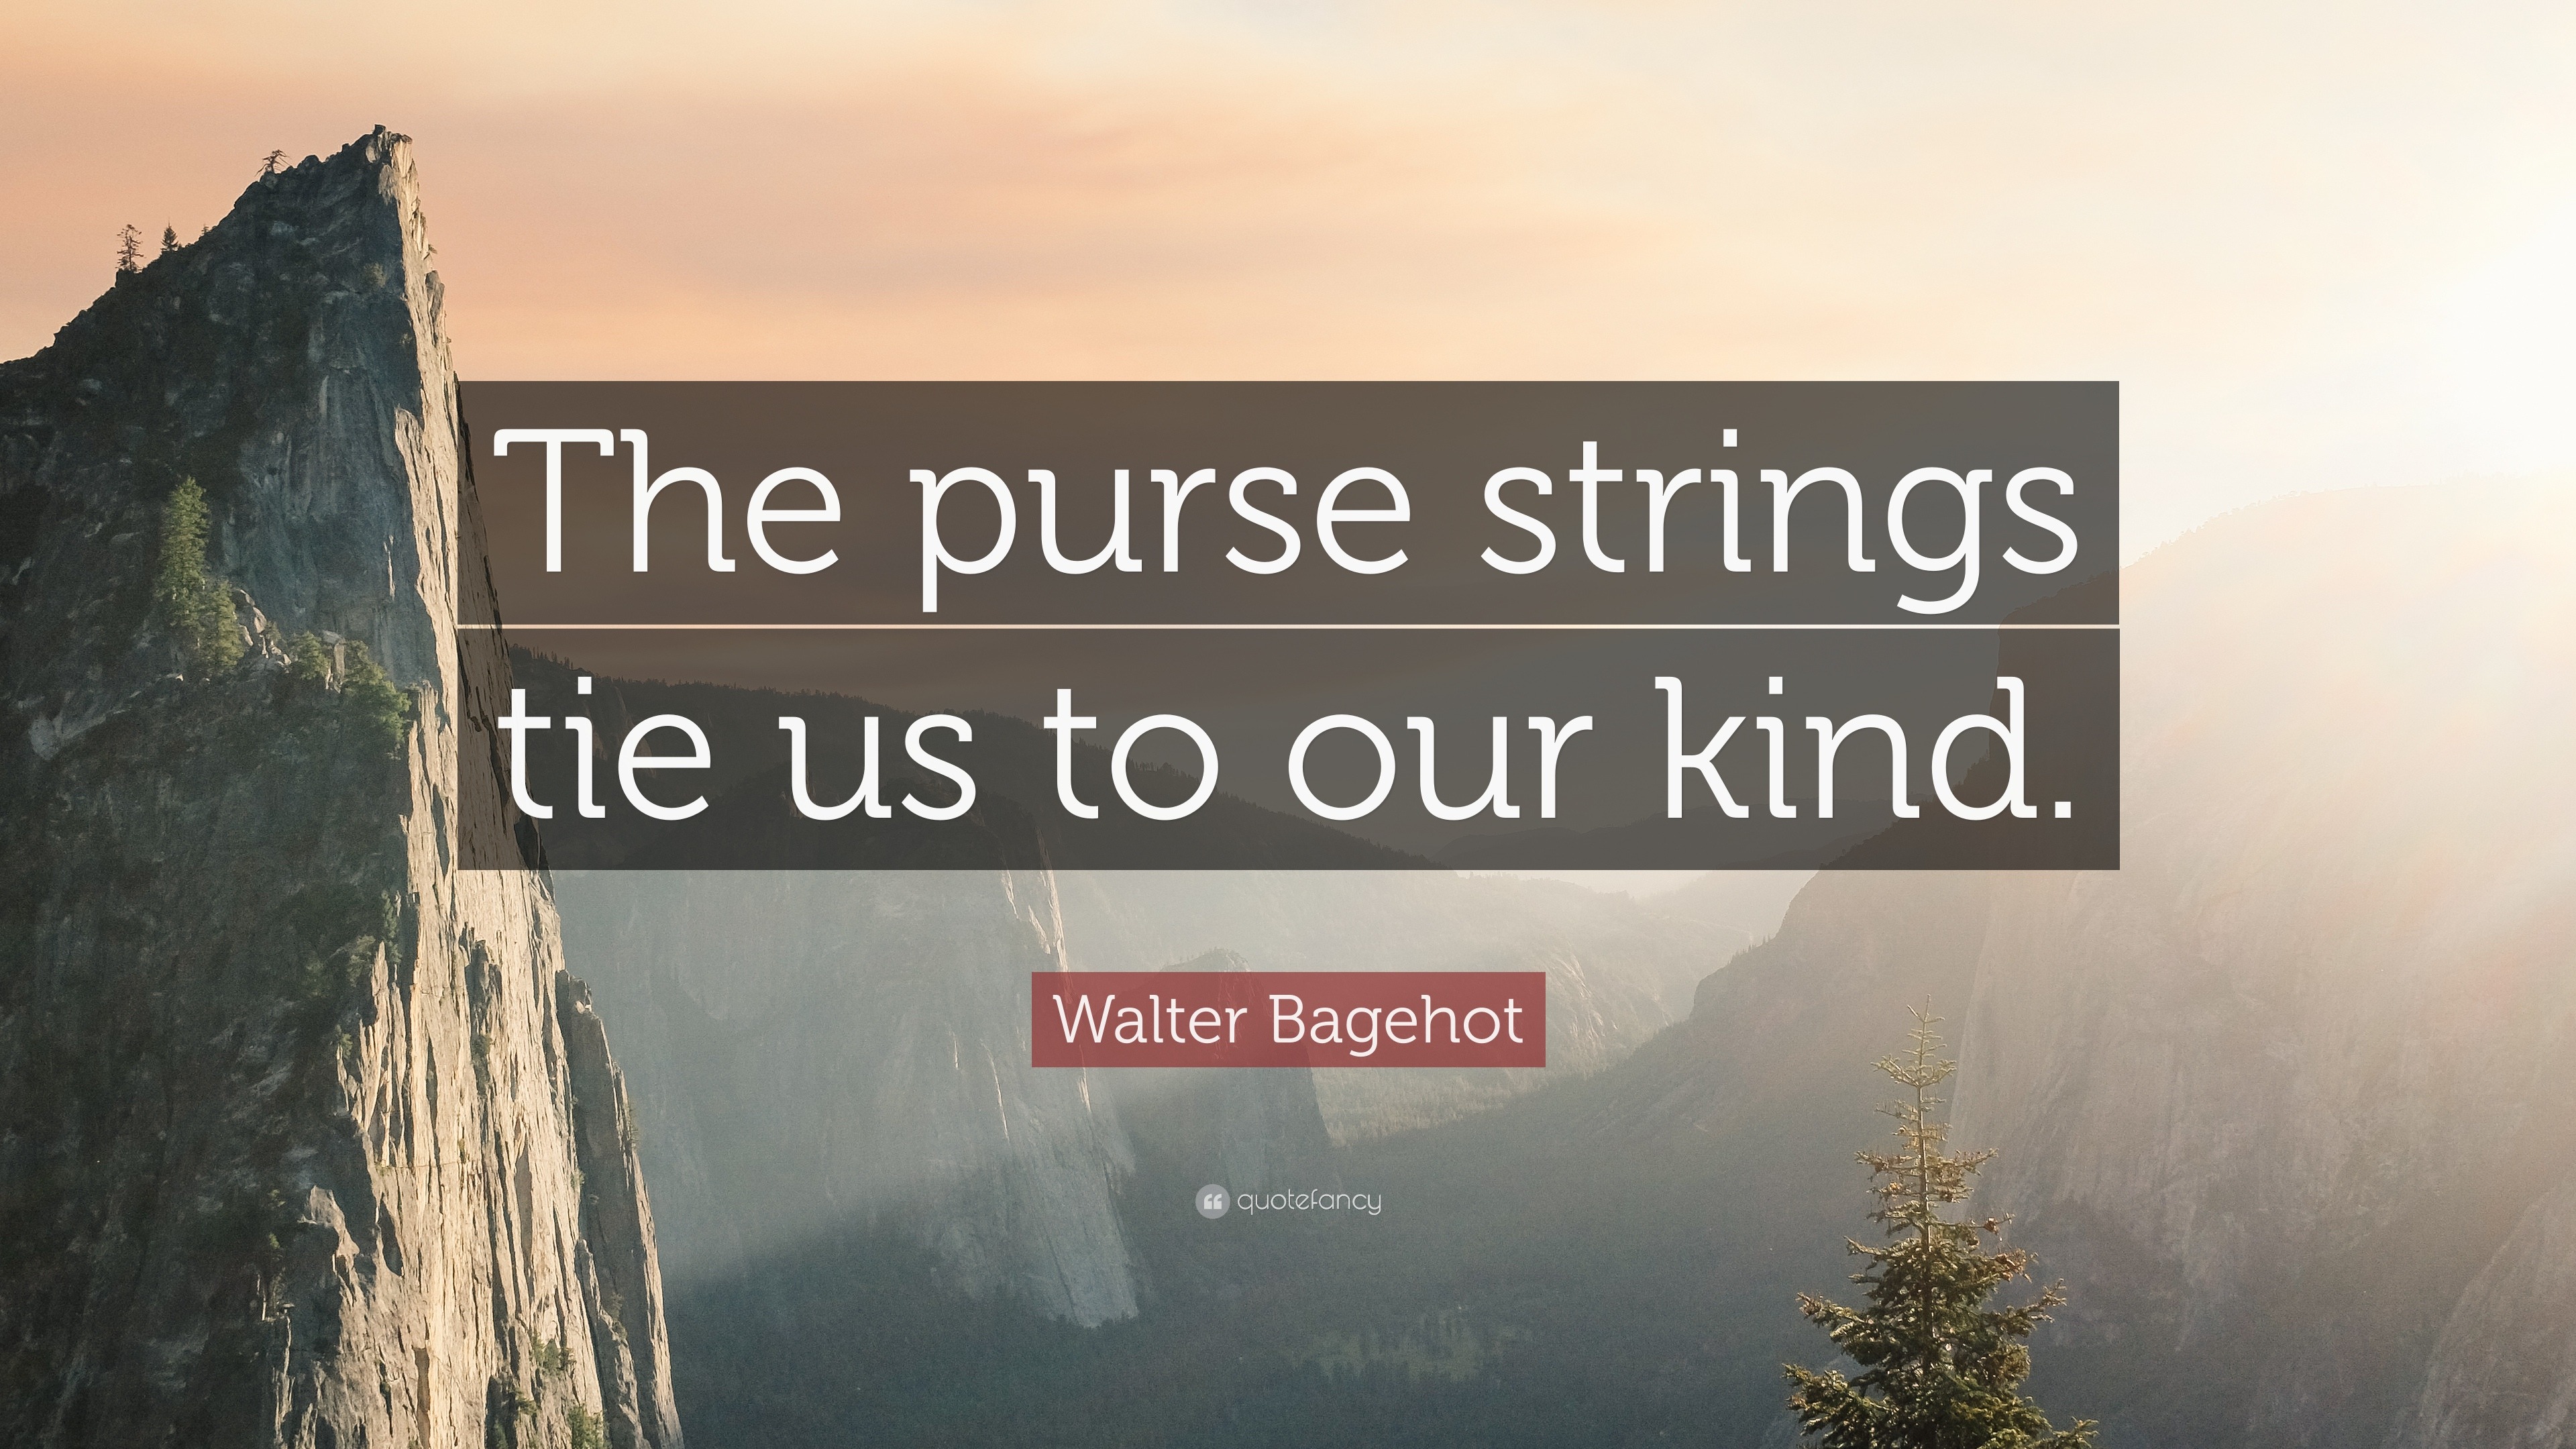 839699 Walter Bagehot Quote The purse strings tie us to our kind